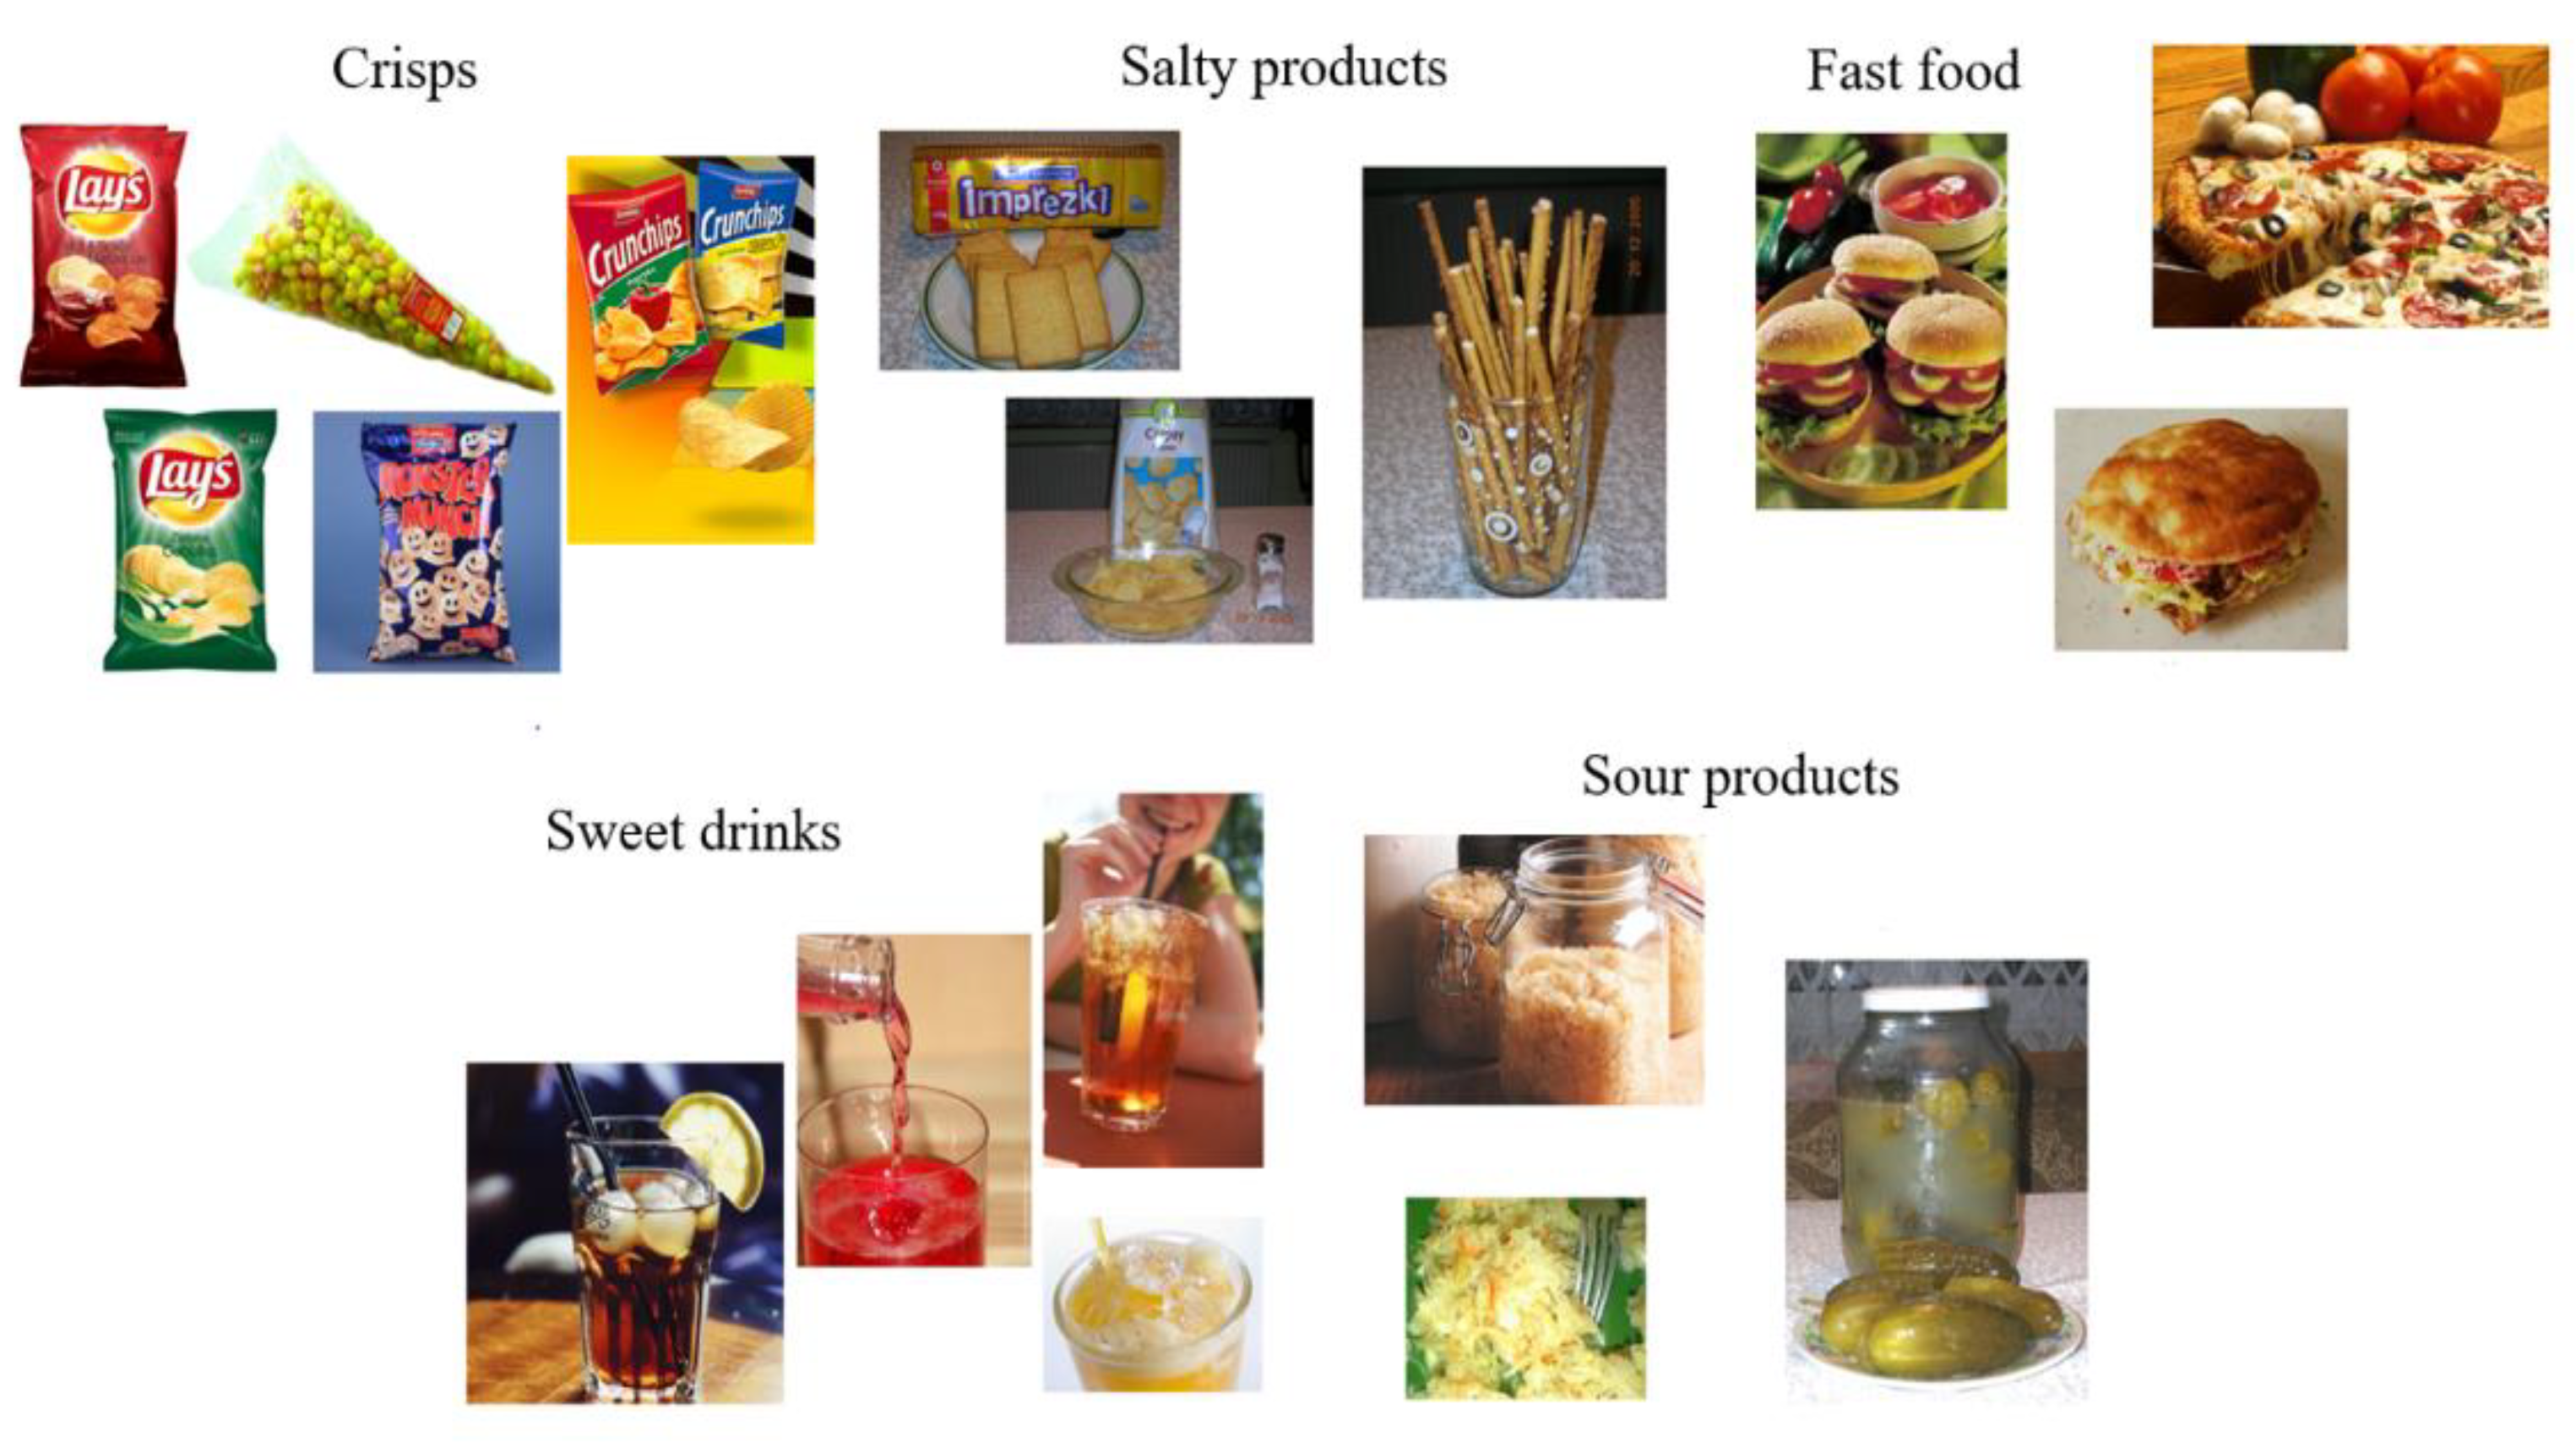 How many remember generic foods/products? - Quora